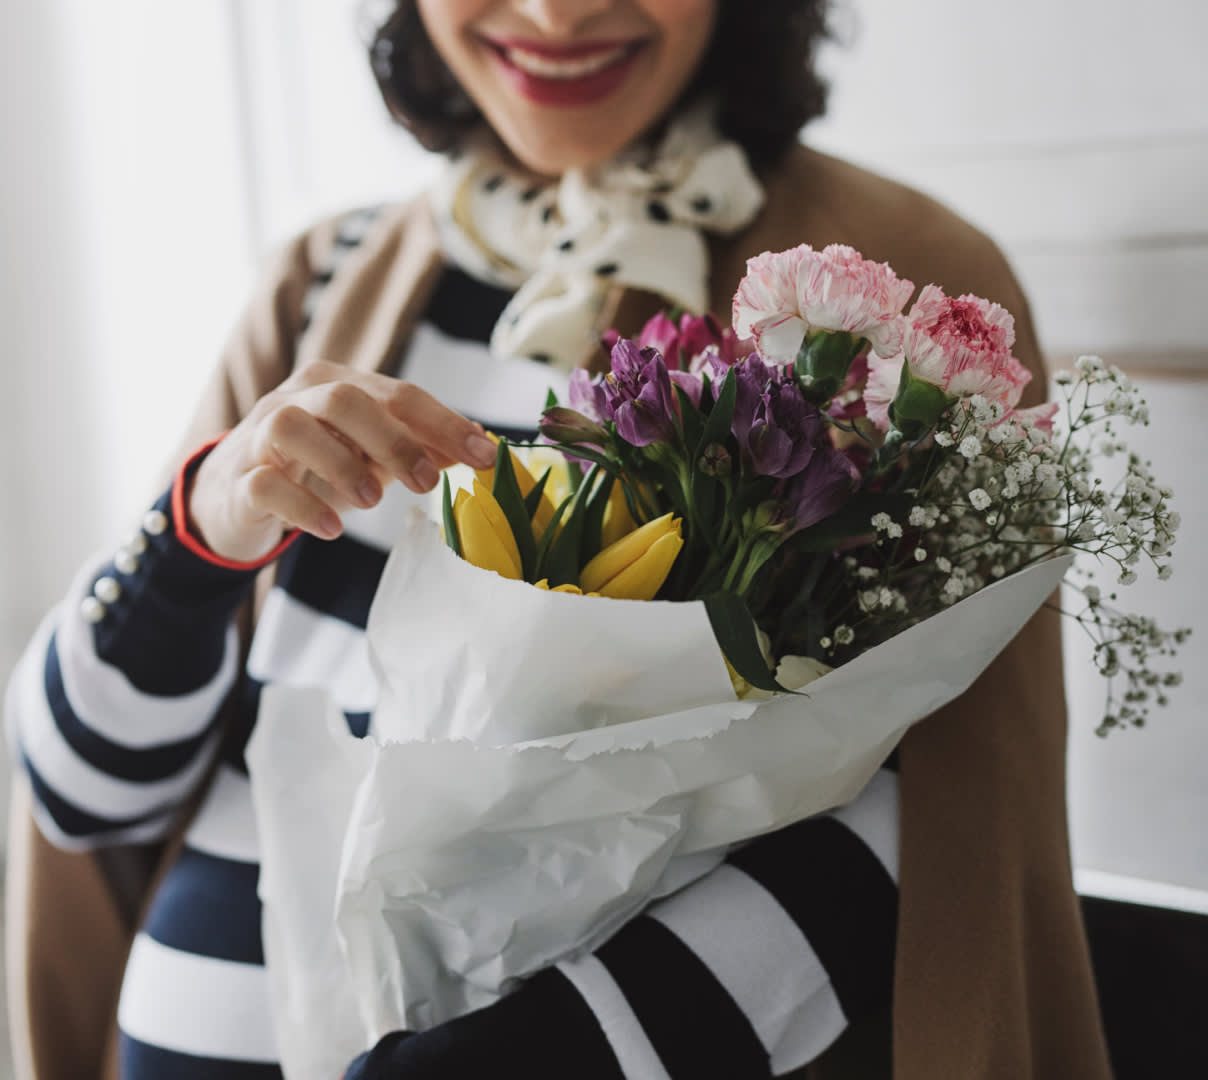 Woman in striped shirt holding bouquet of flowers